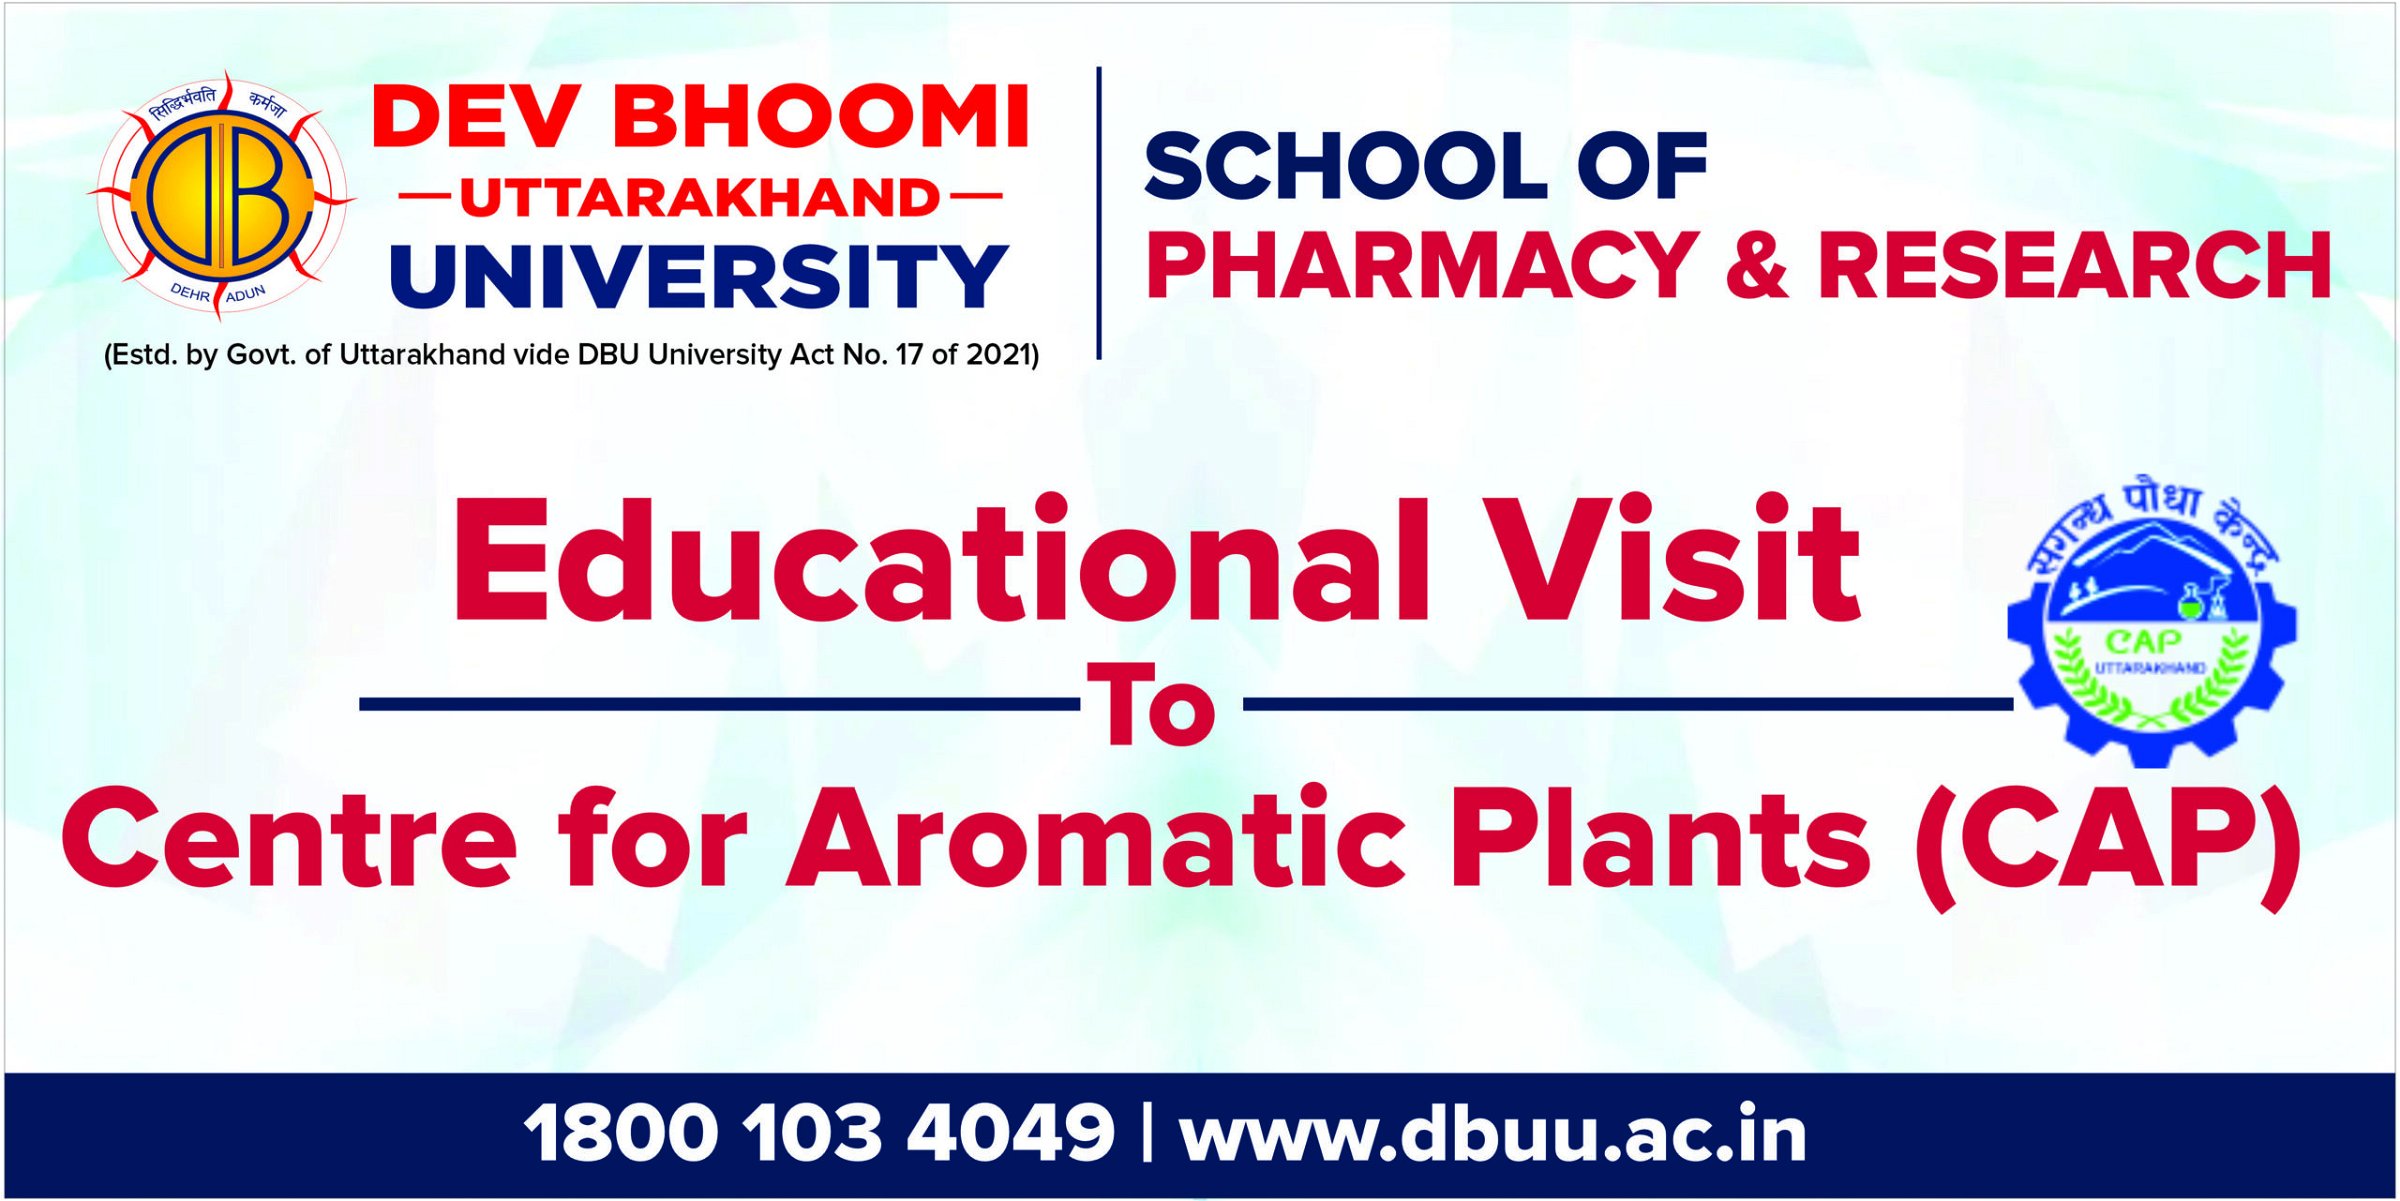 Educational Visit to Centre for Aromatic Plants (CAP)